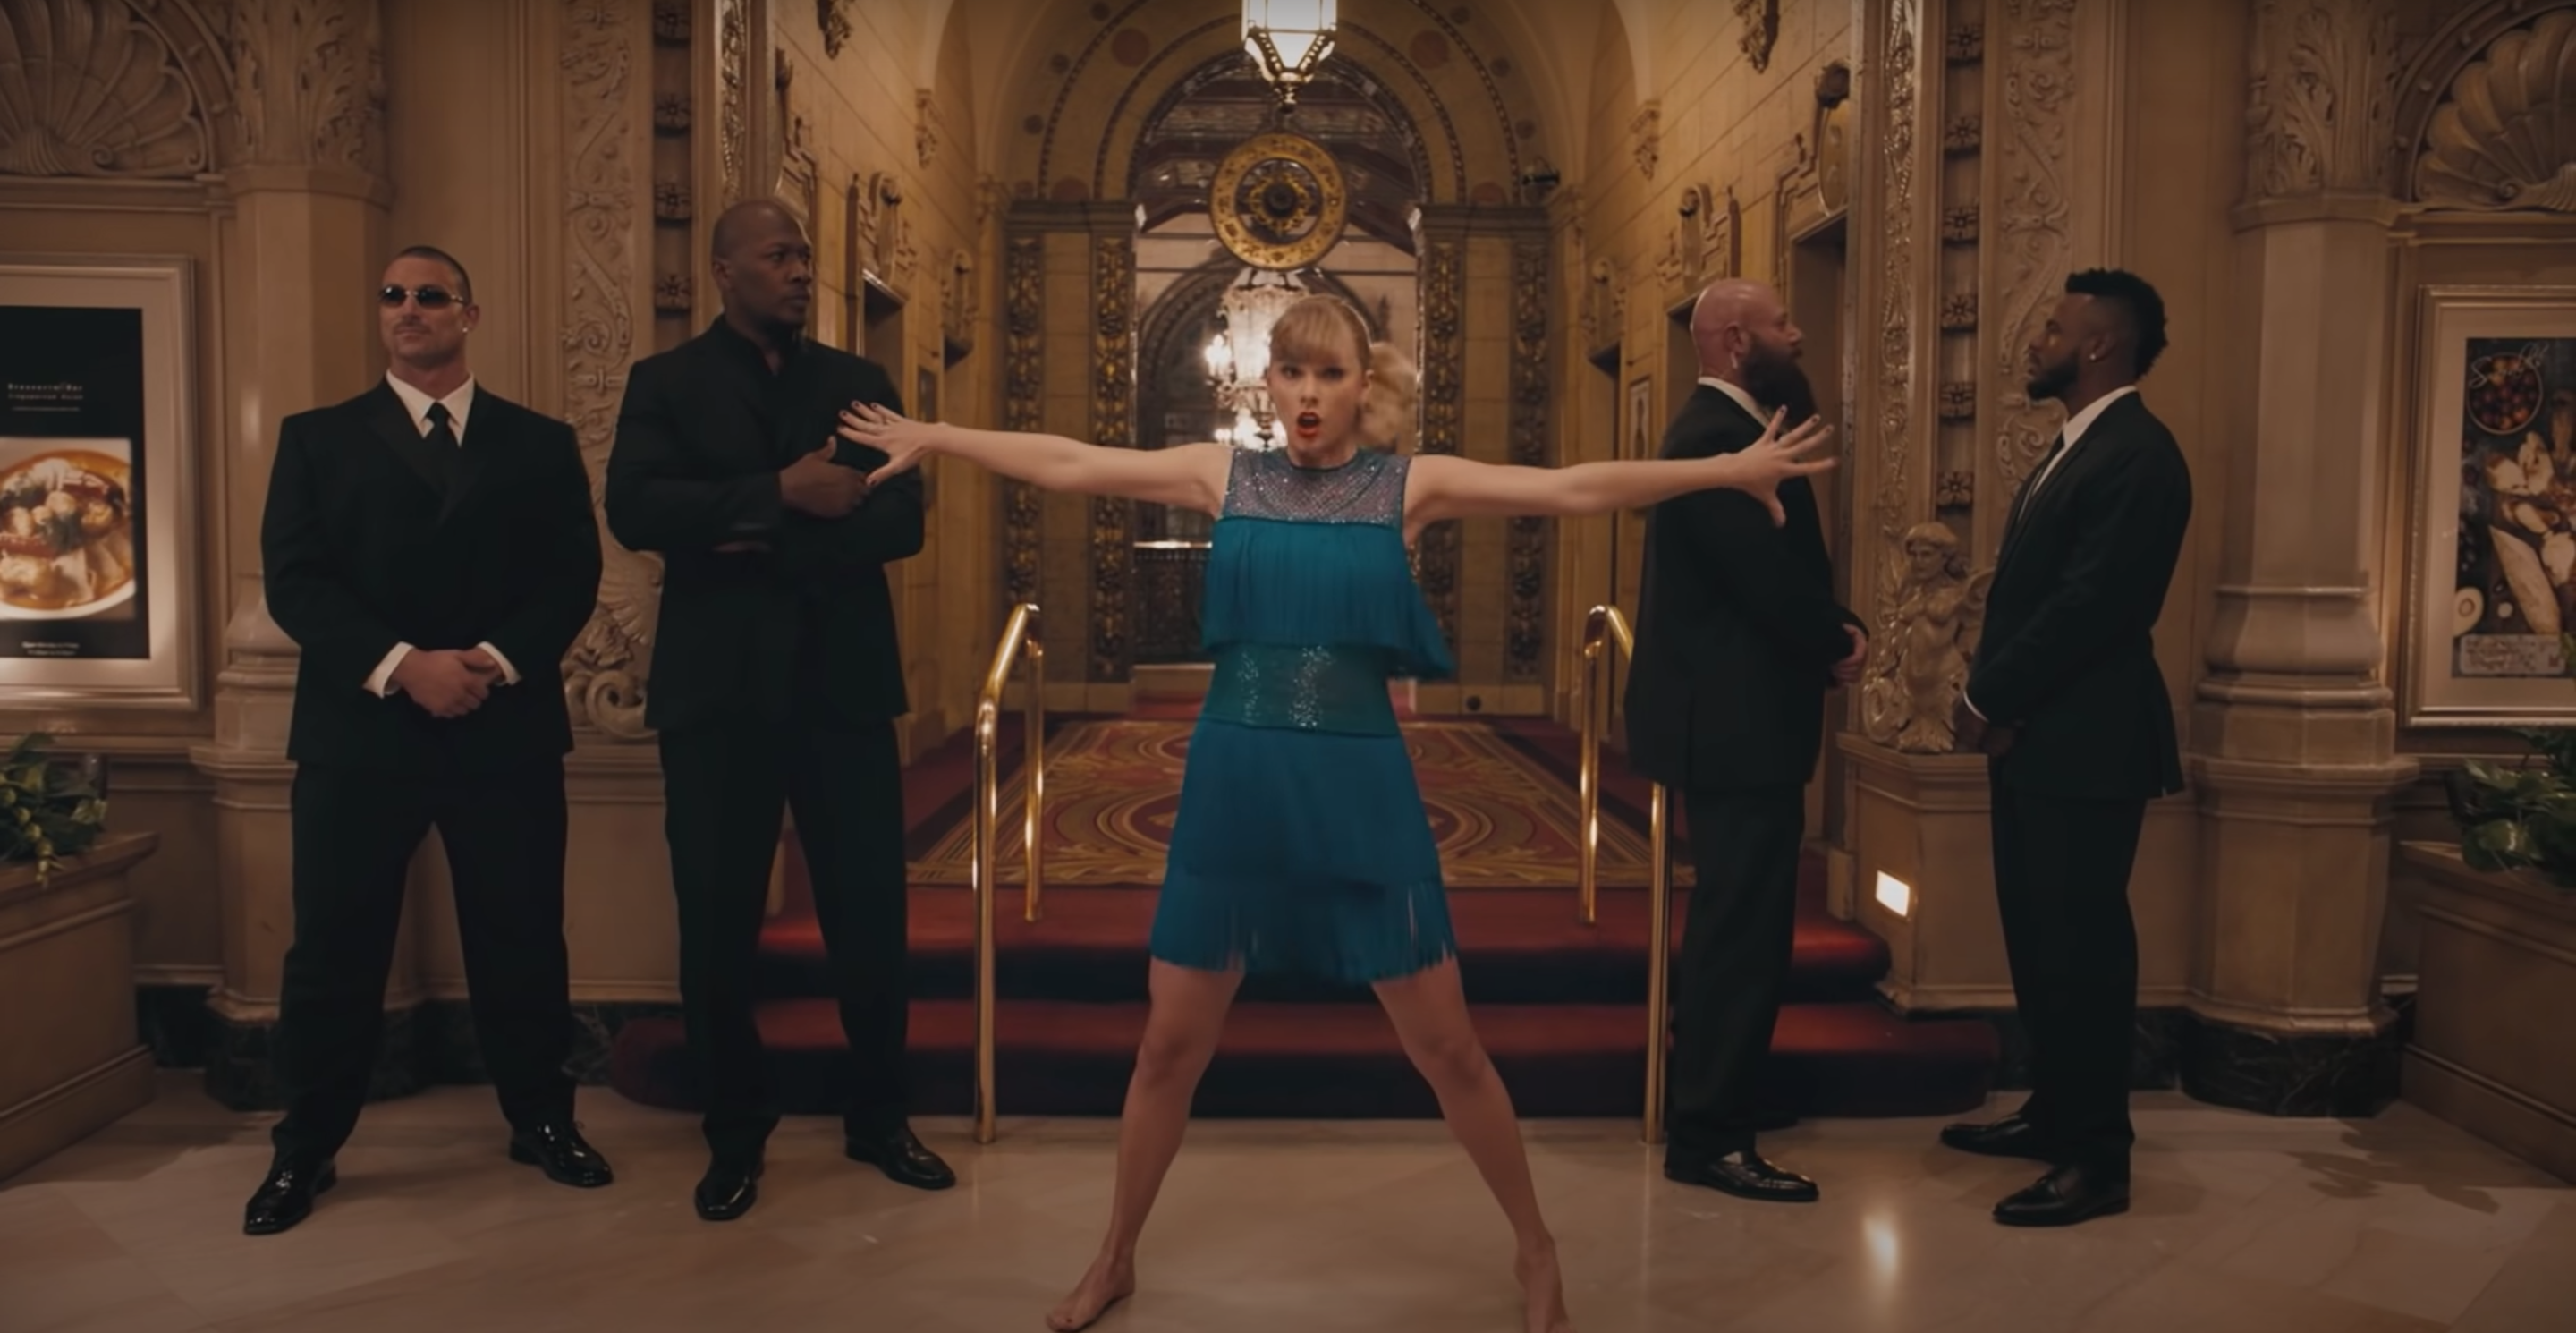 Taylor Swift wearing a blue dress in a hotel lobby with her arms outstretched and security guards on both sides.